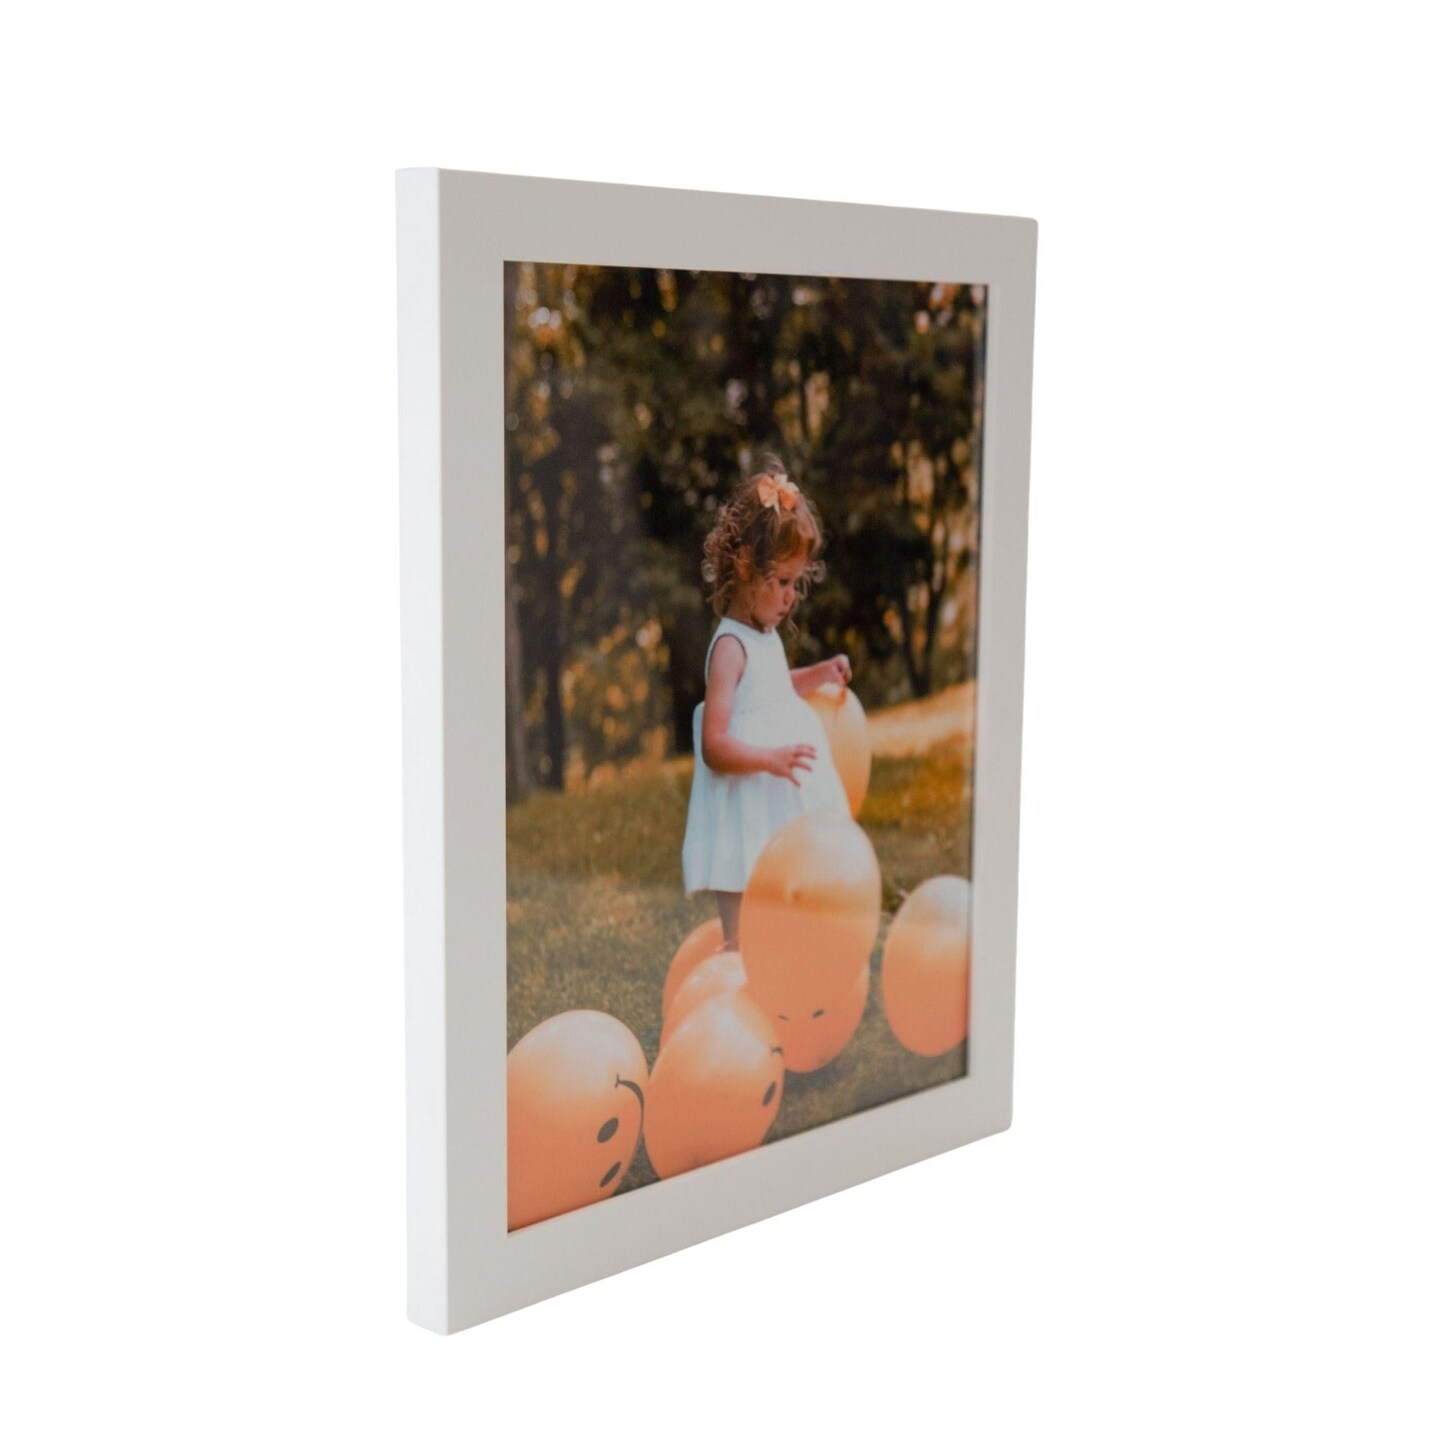 Gallery 20x29 Picture Frame Black 20x29 Frame 20 x 29 Poster Frames 20 x 29